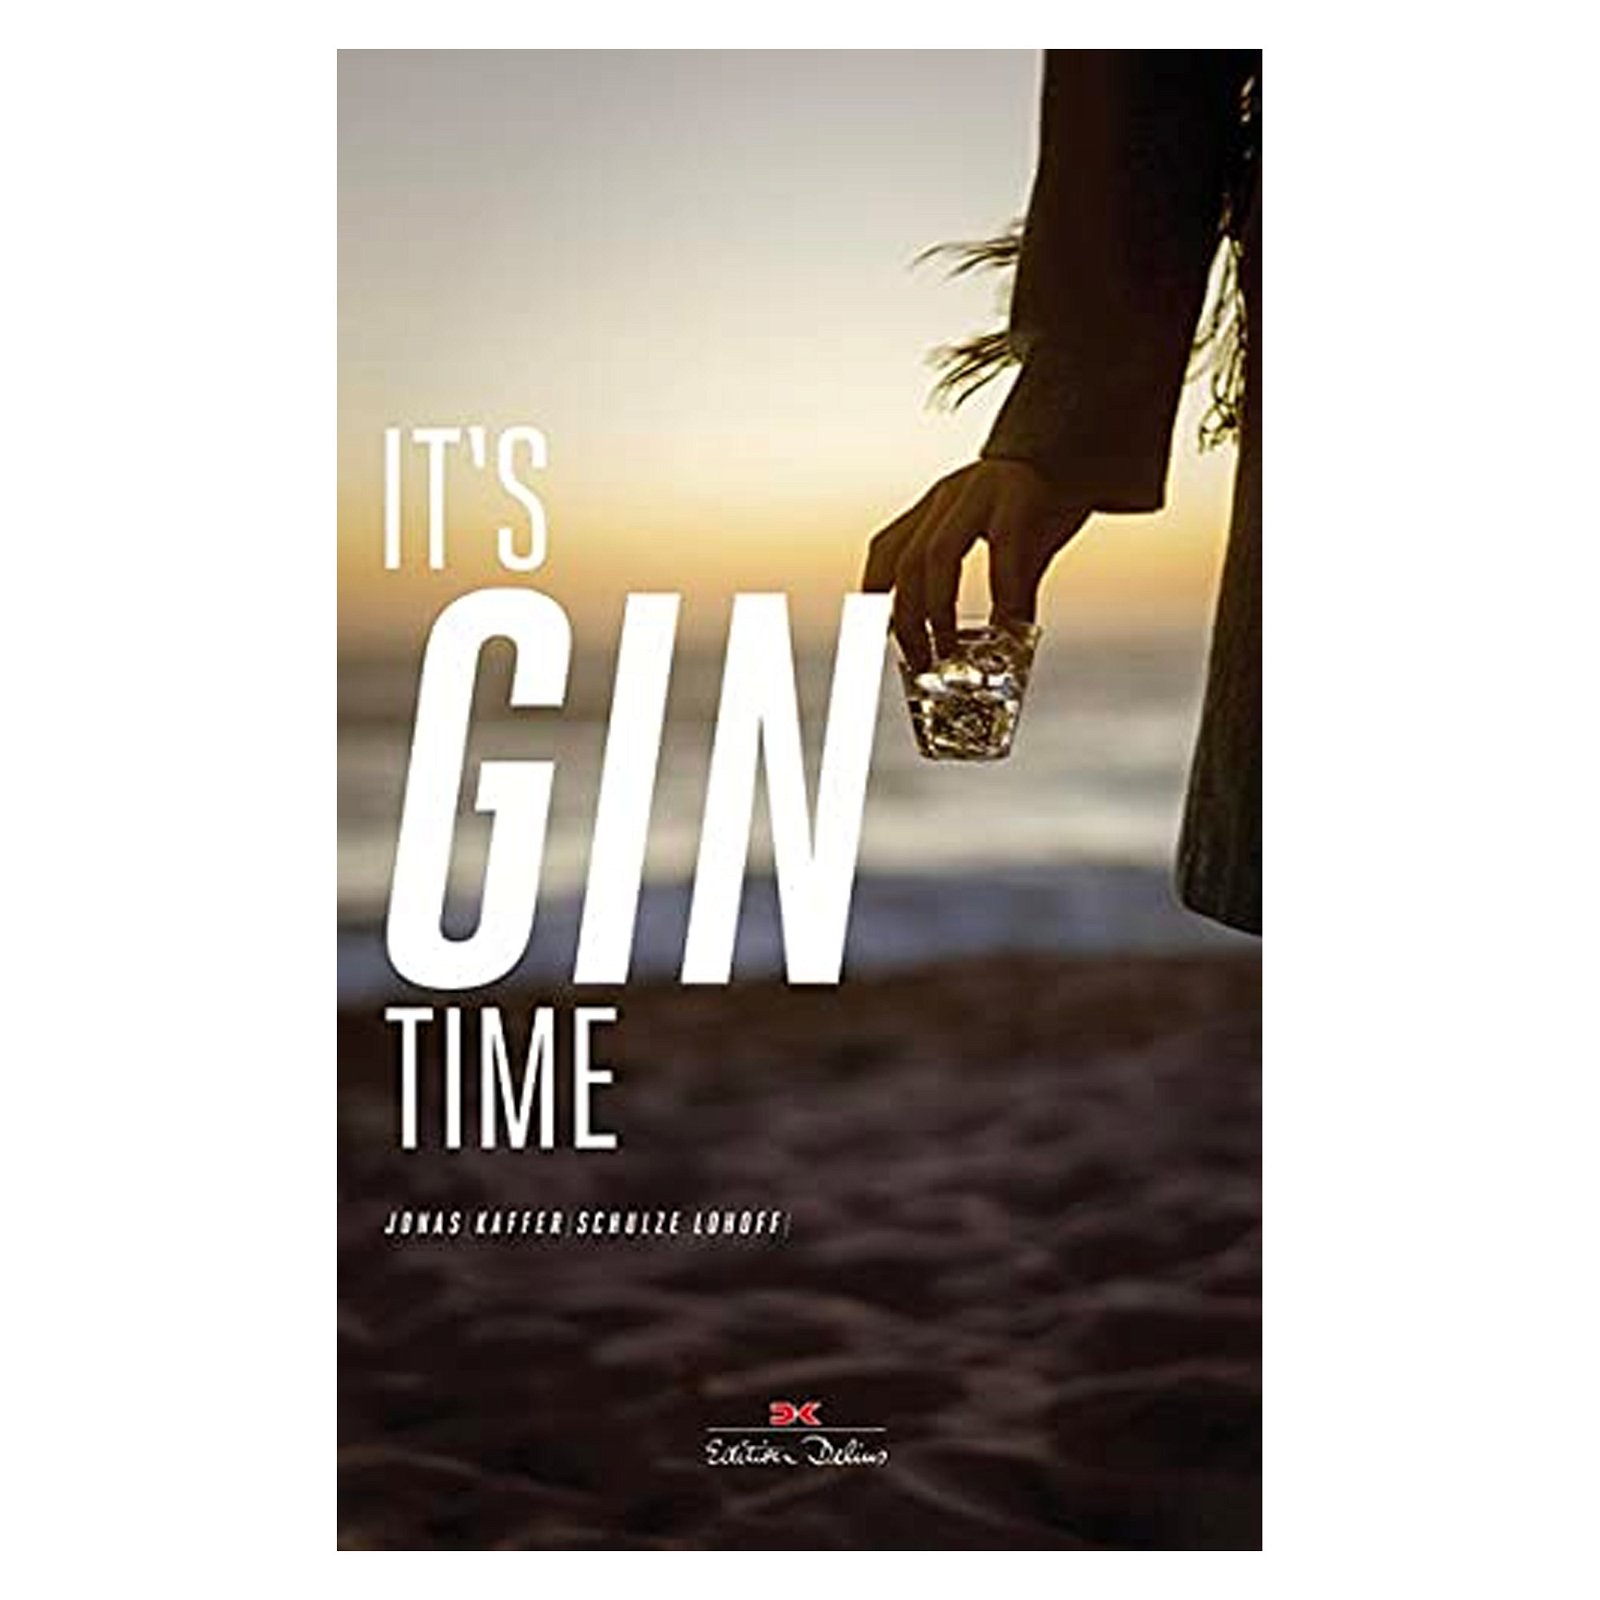 Its Gintime